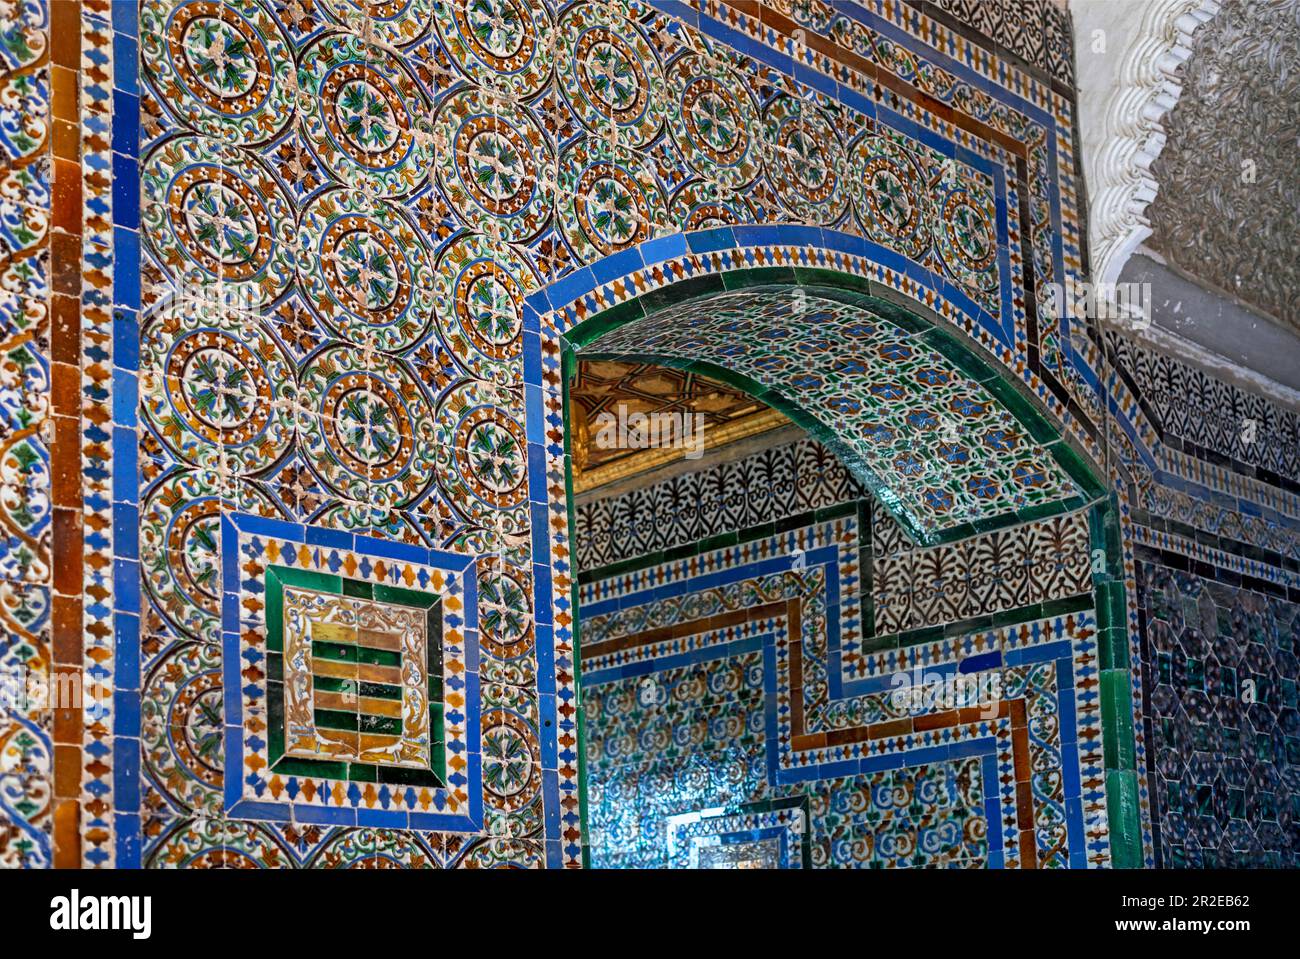 Spain, Andalusia, Seville, La Casa de Pilatos (Pilate's House), azulejo tile work, palace in Seville which serves as the permanent residency of the Du Stock Photo